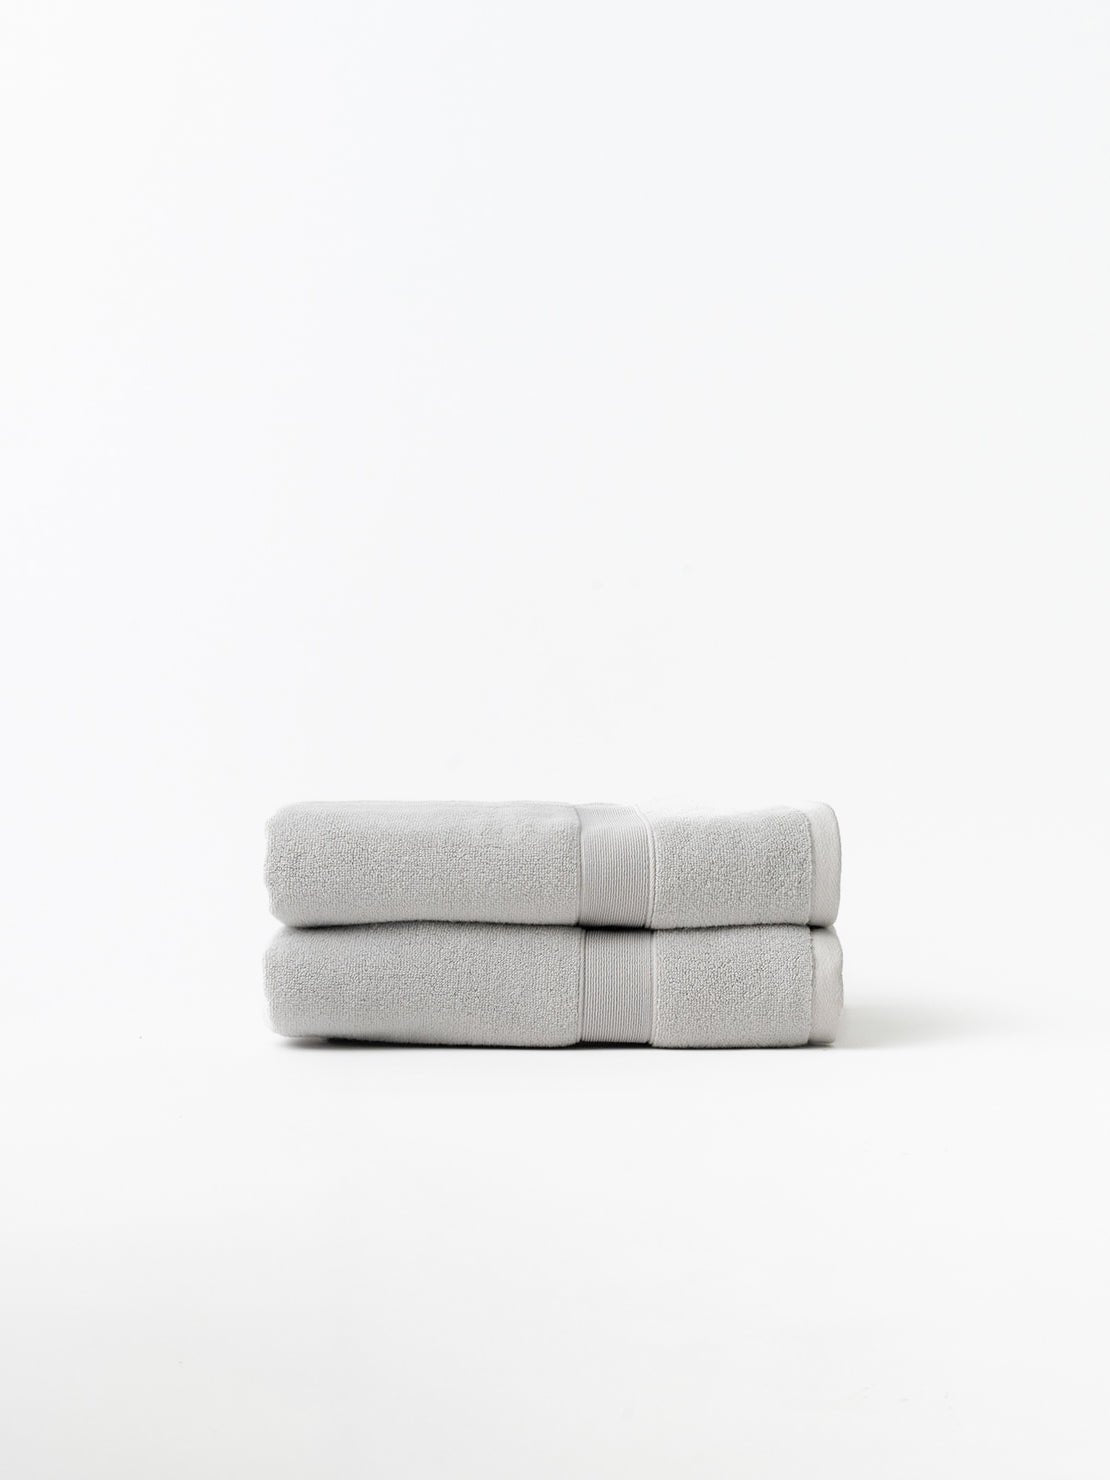 Light grey luxe bath towels folded with white background |Color:Light Grey